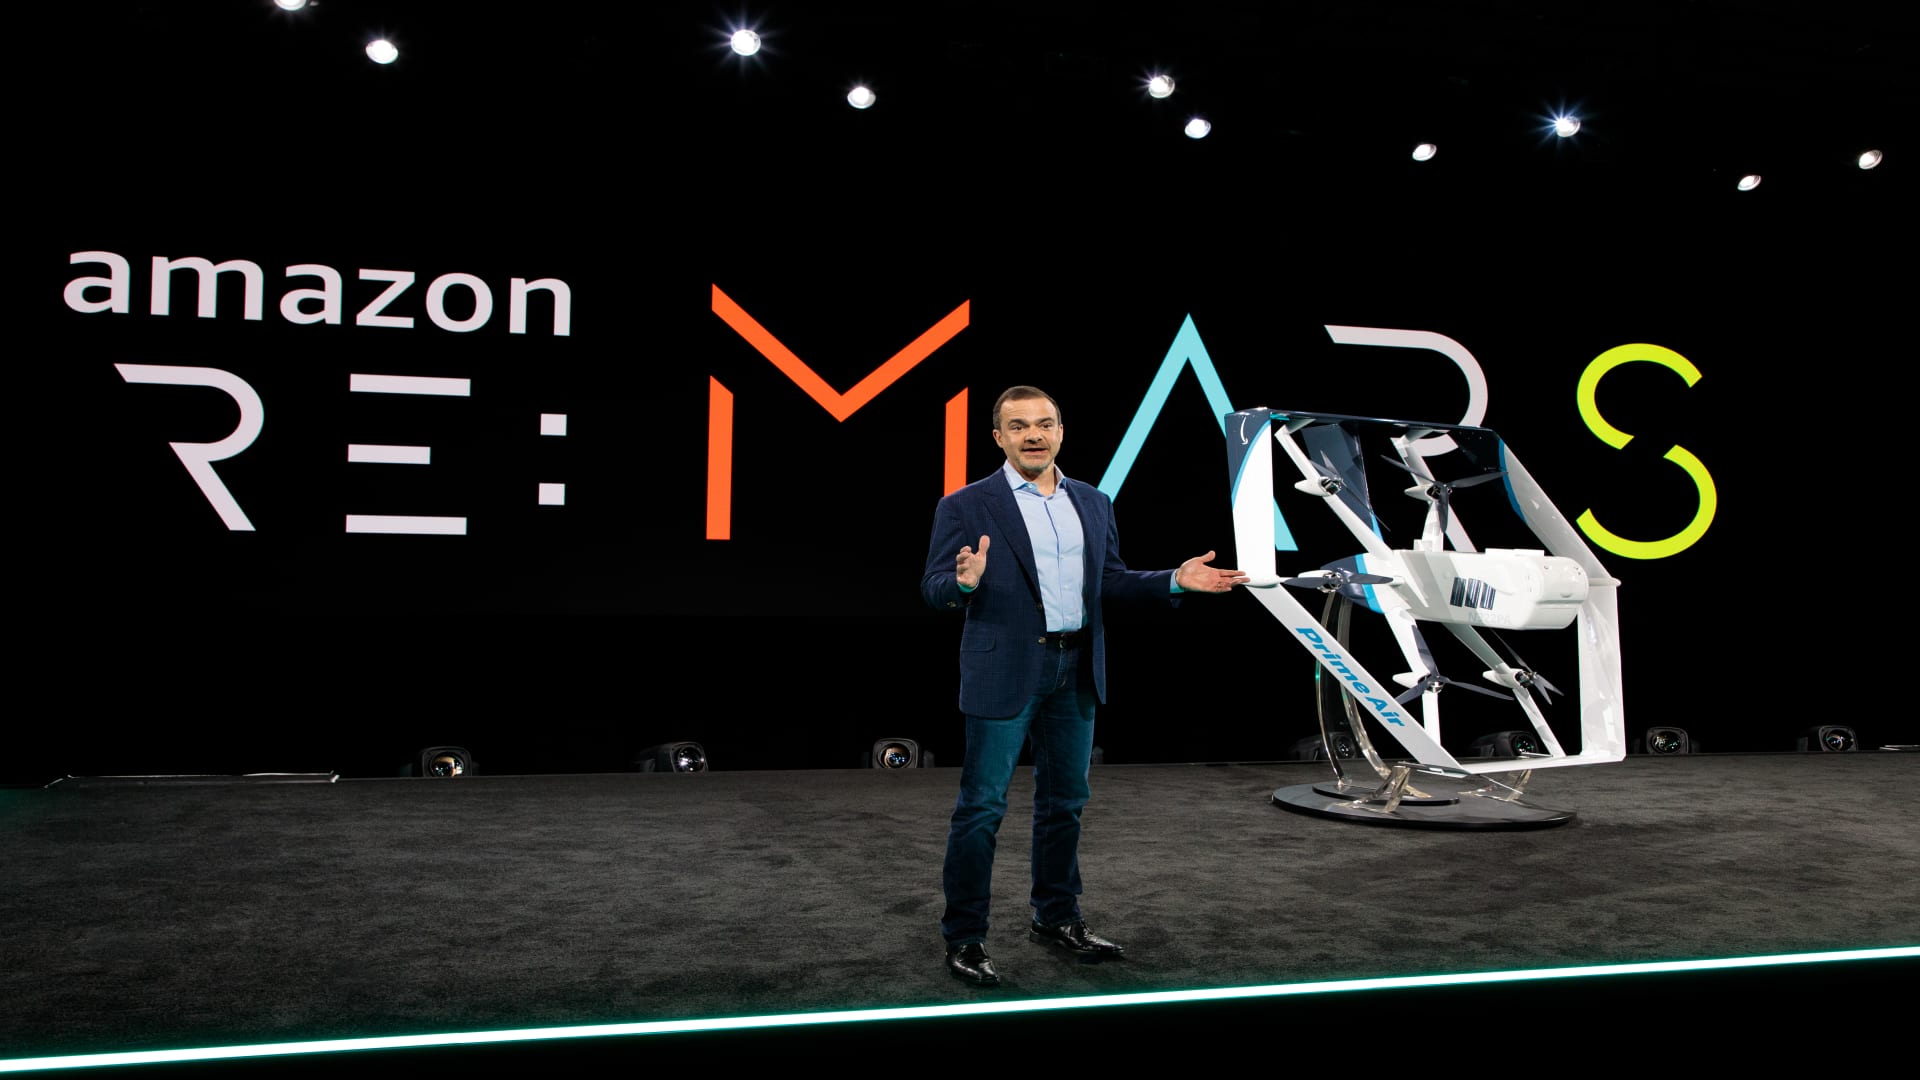 Amazon will not host re:MARS robotics and AI conference this year